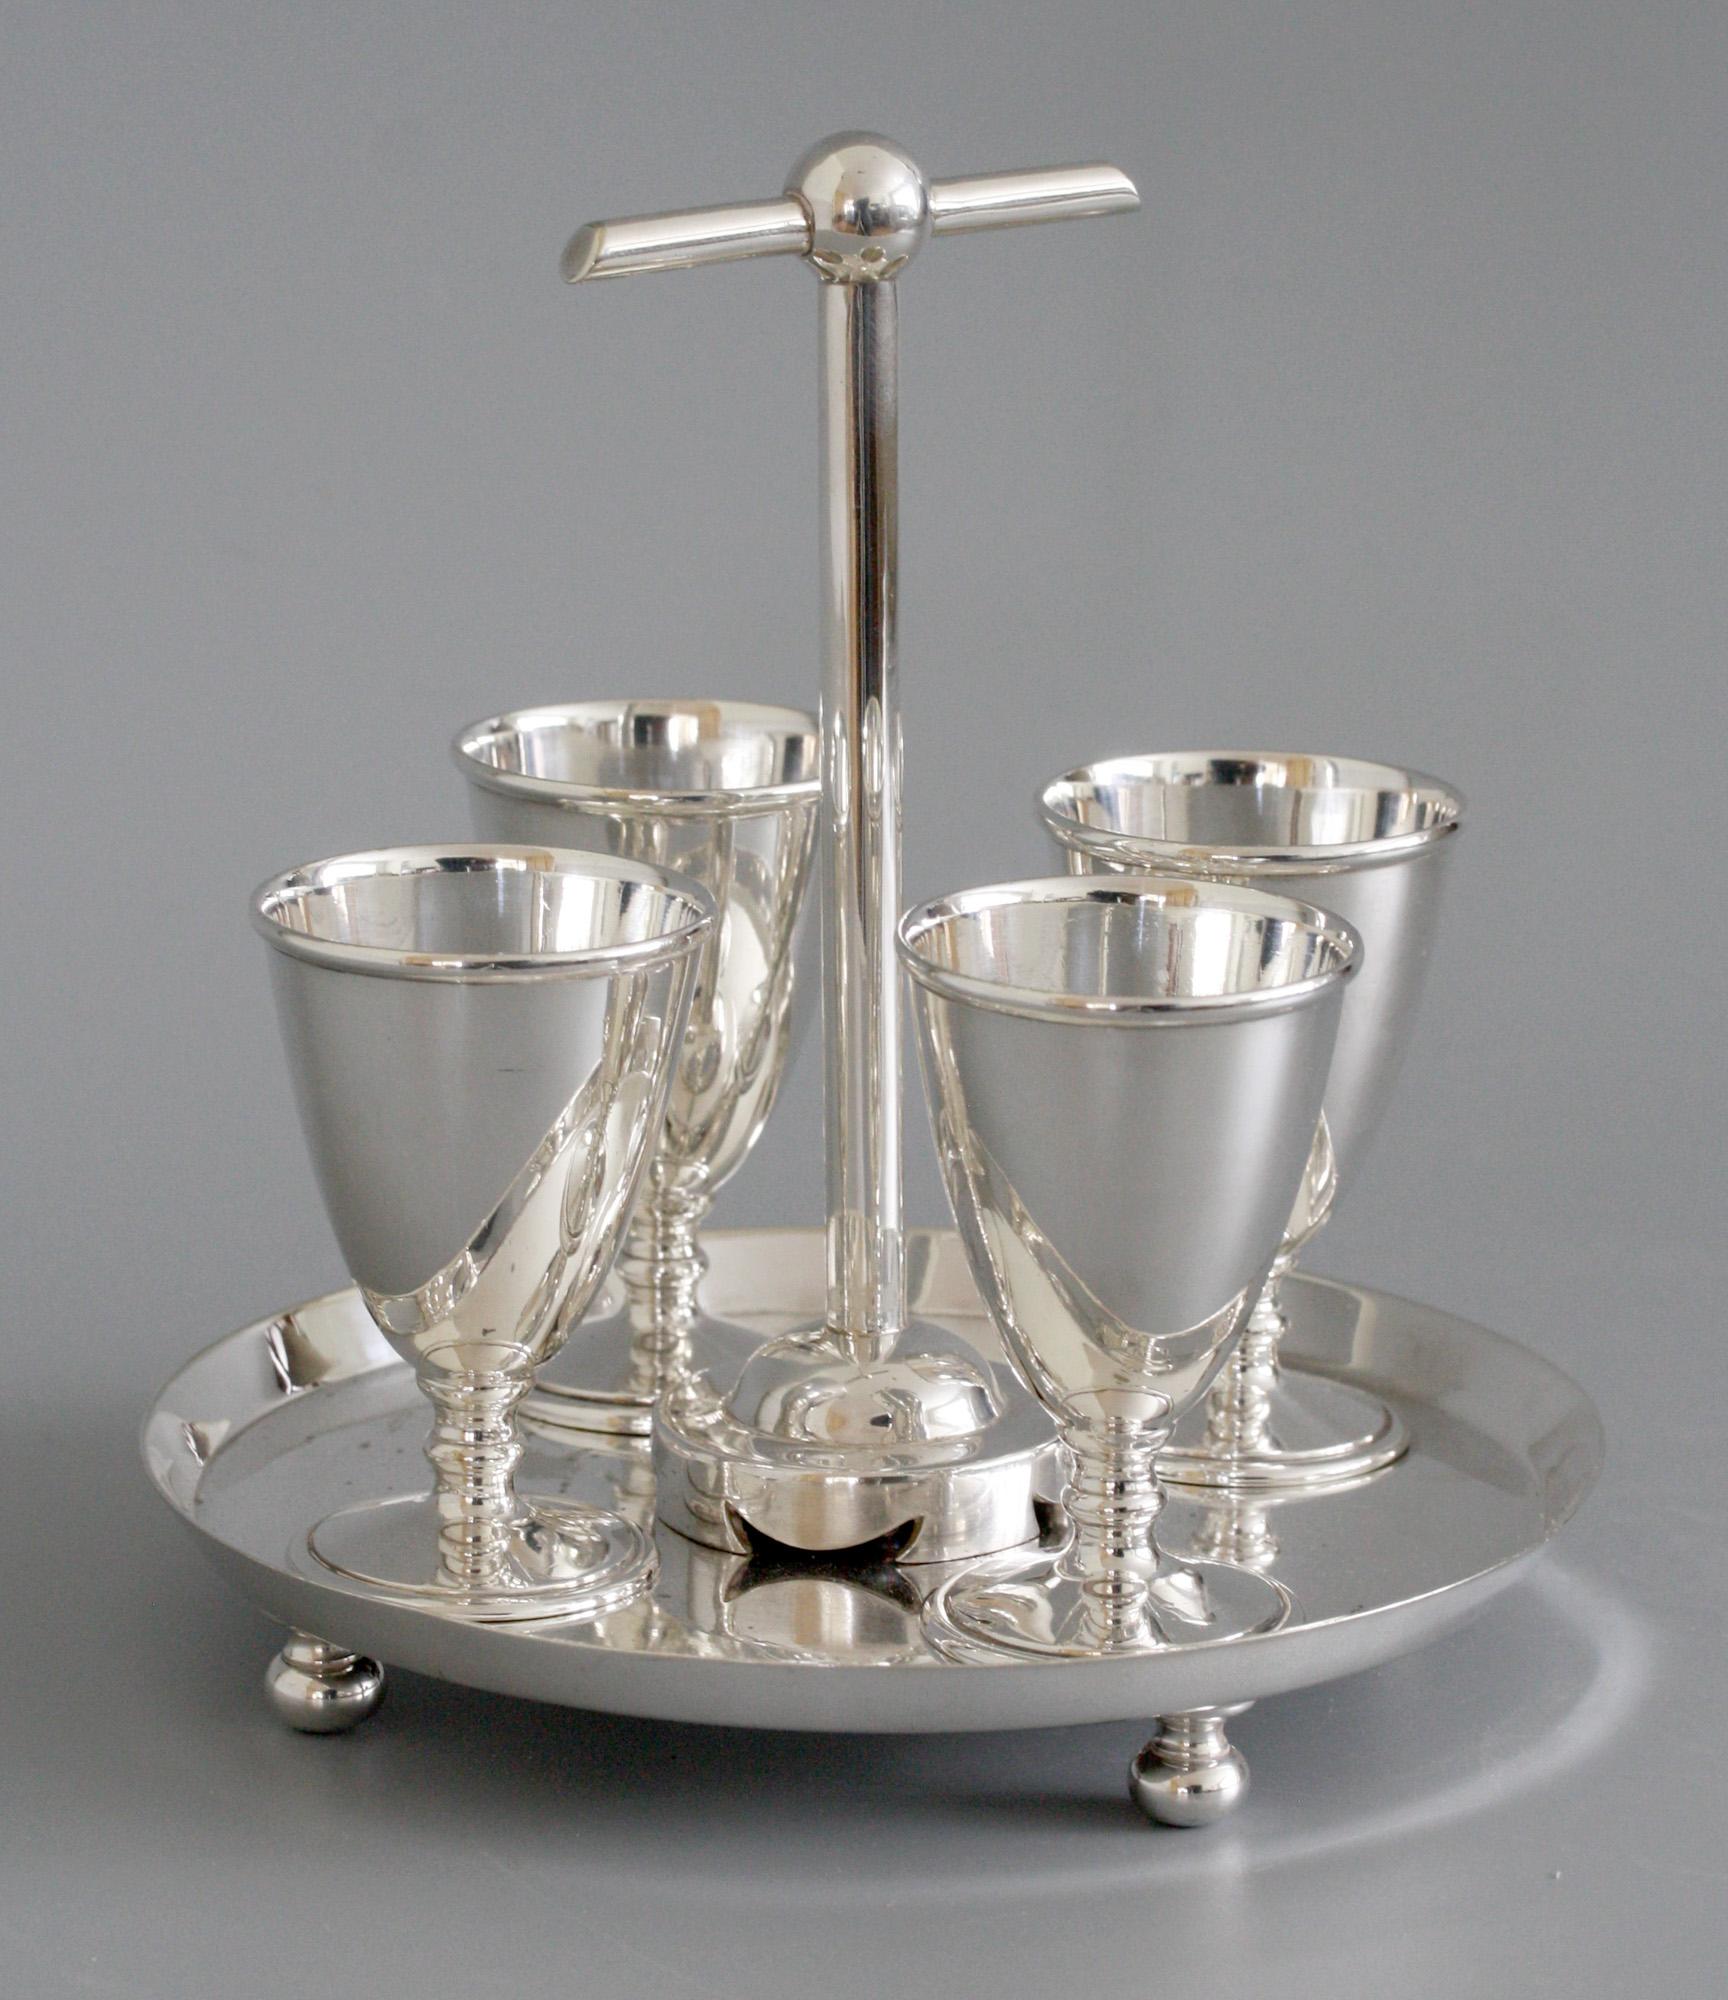 Hukin & Heath Silver Plated Four Eggcup Stand Designed by Christopher Dresser 4